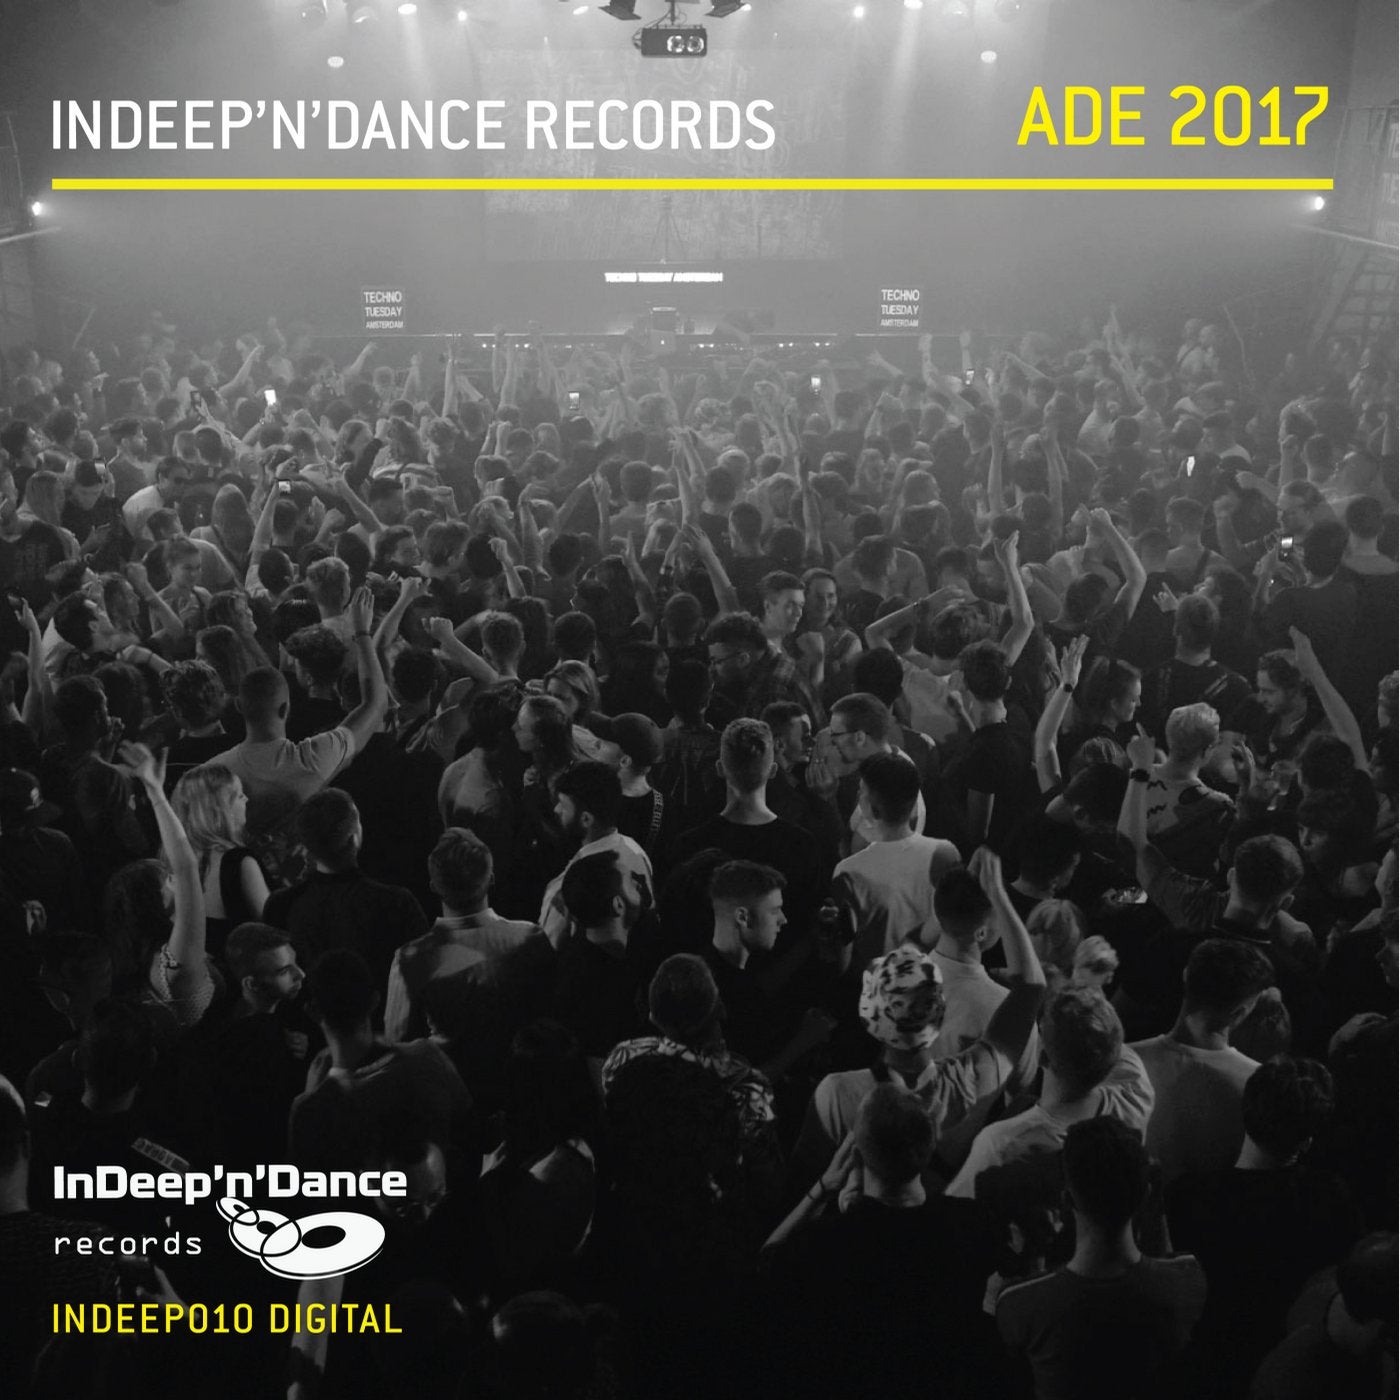 InDeep'n'Dance Records ADE 2017